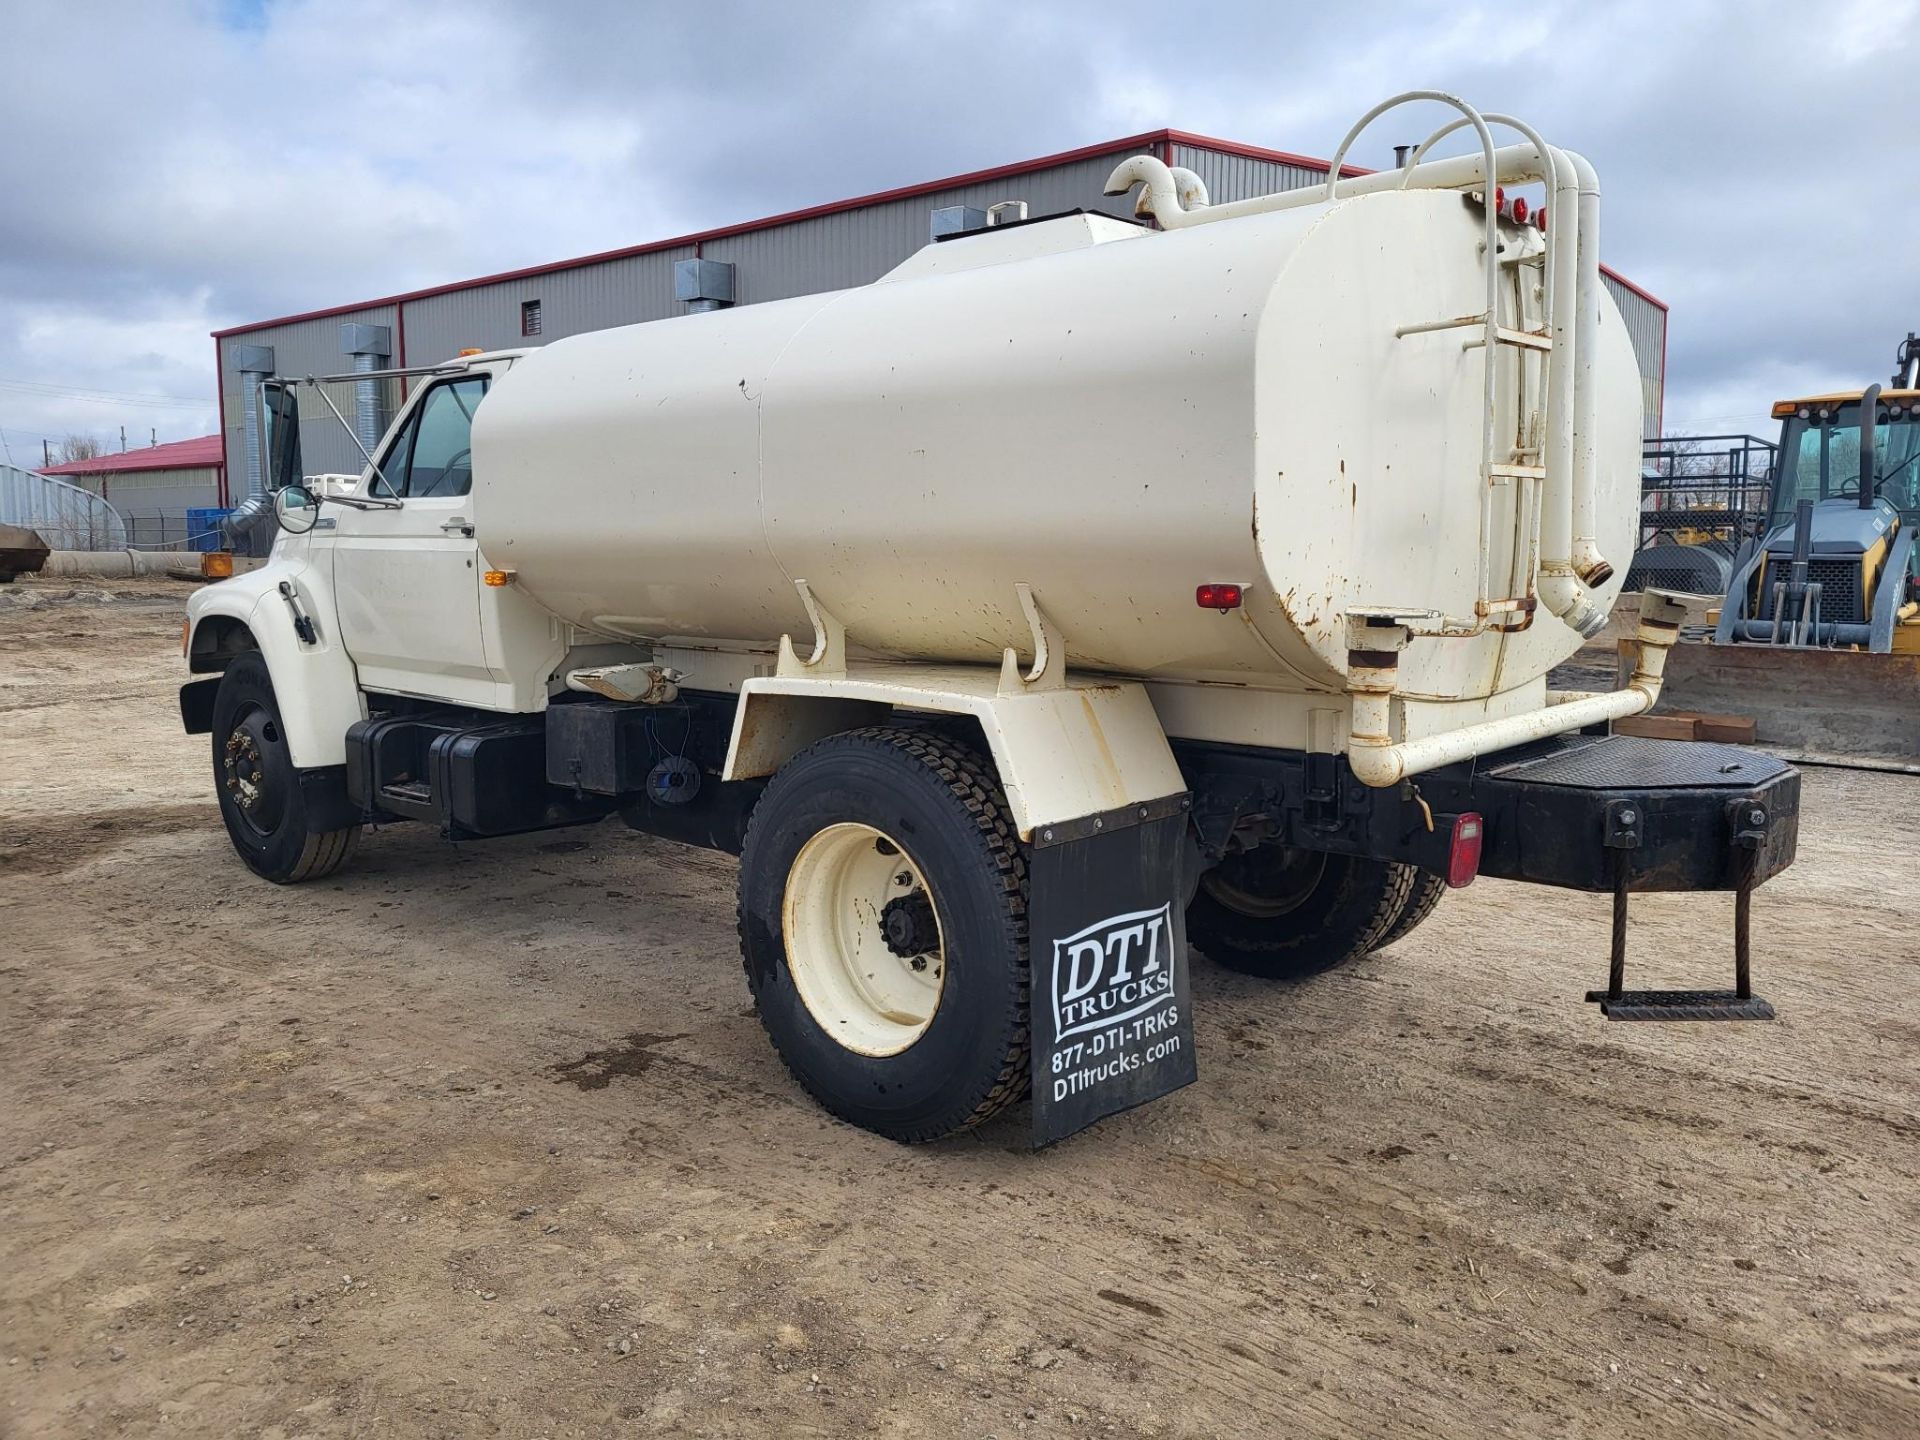 1995 FORD F800 WATER TRUCK - Image 7 of 20